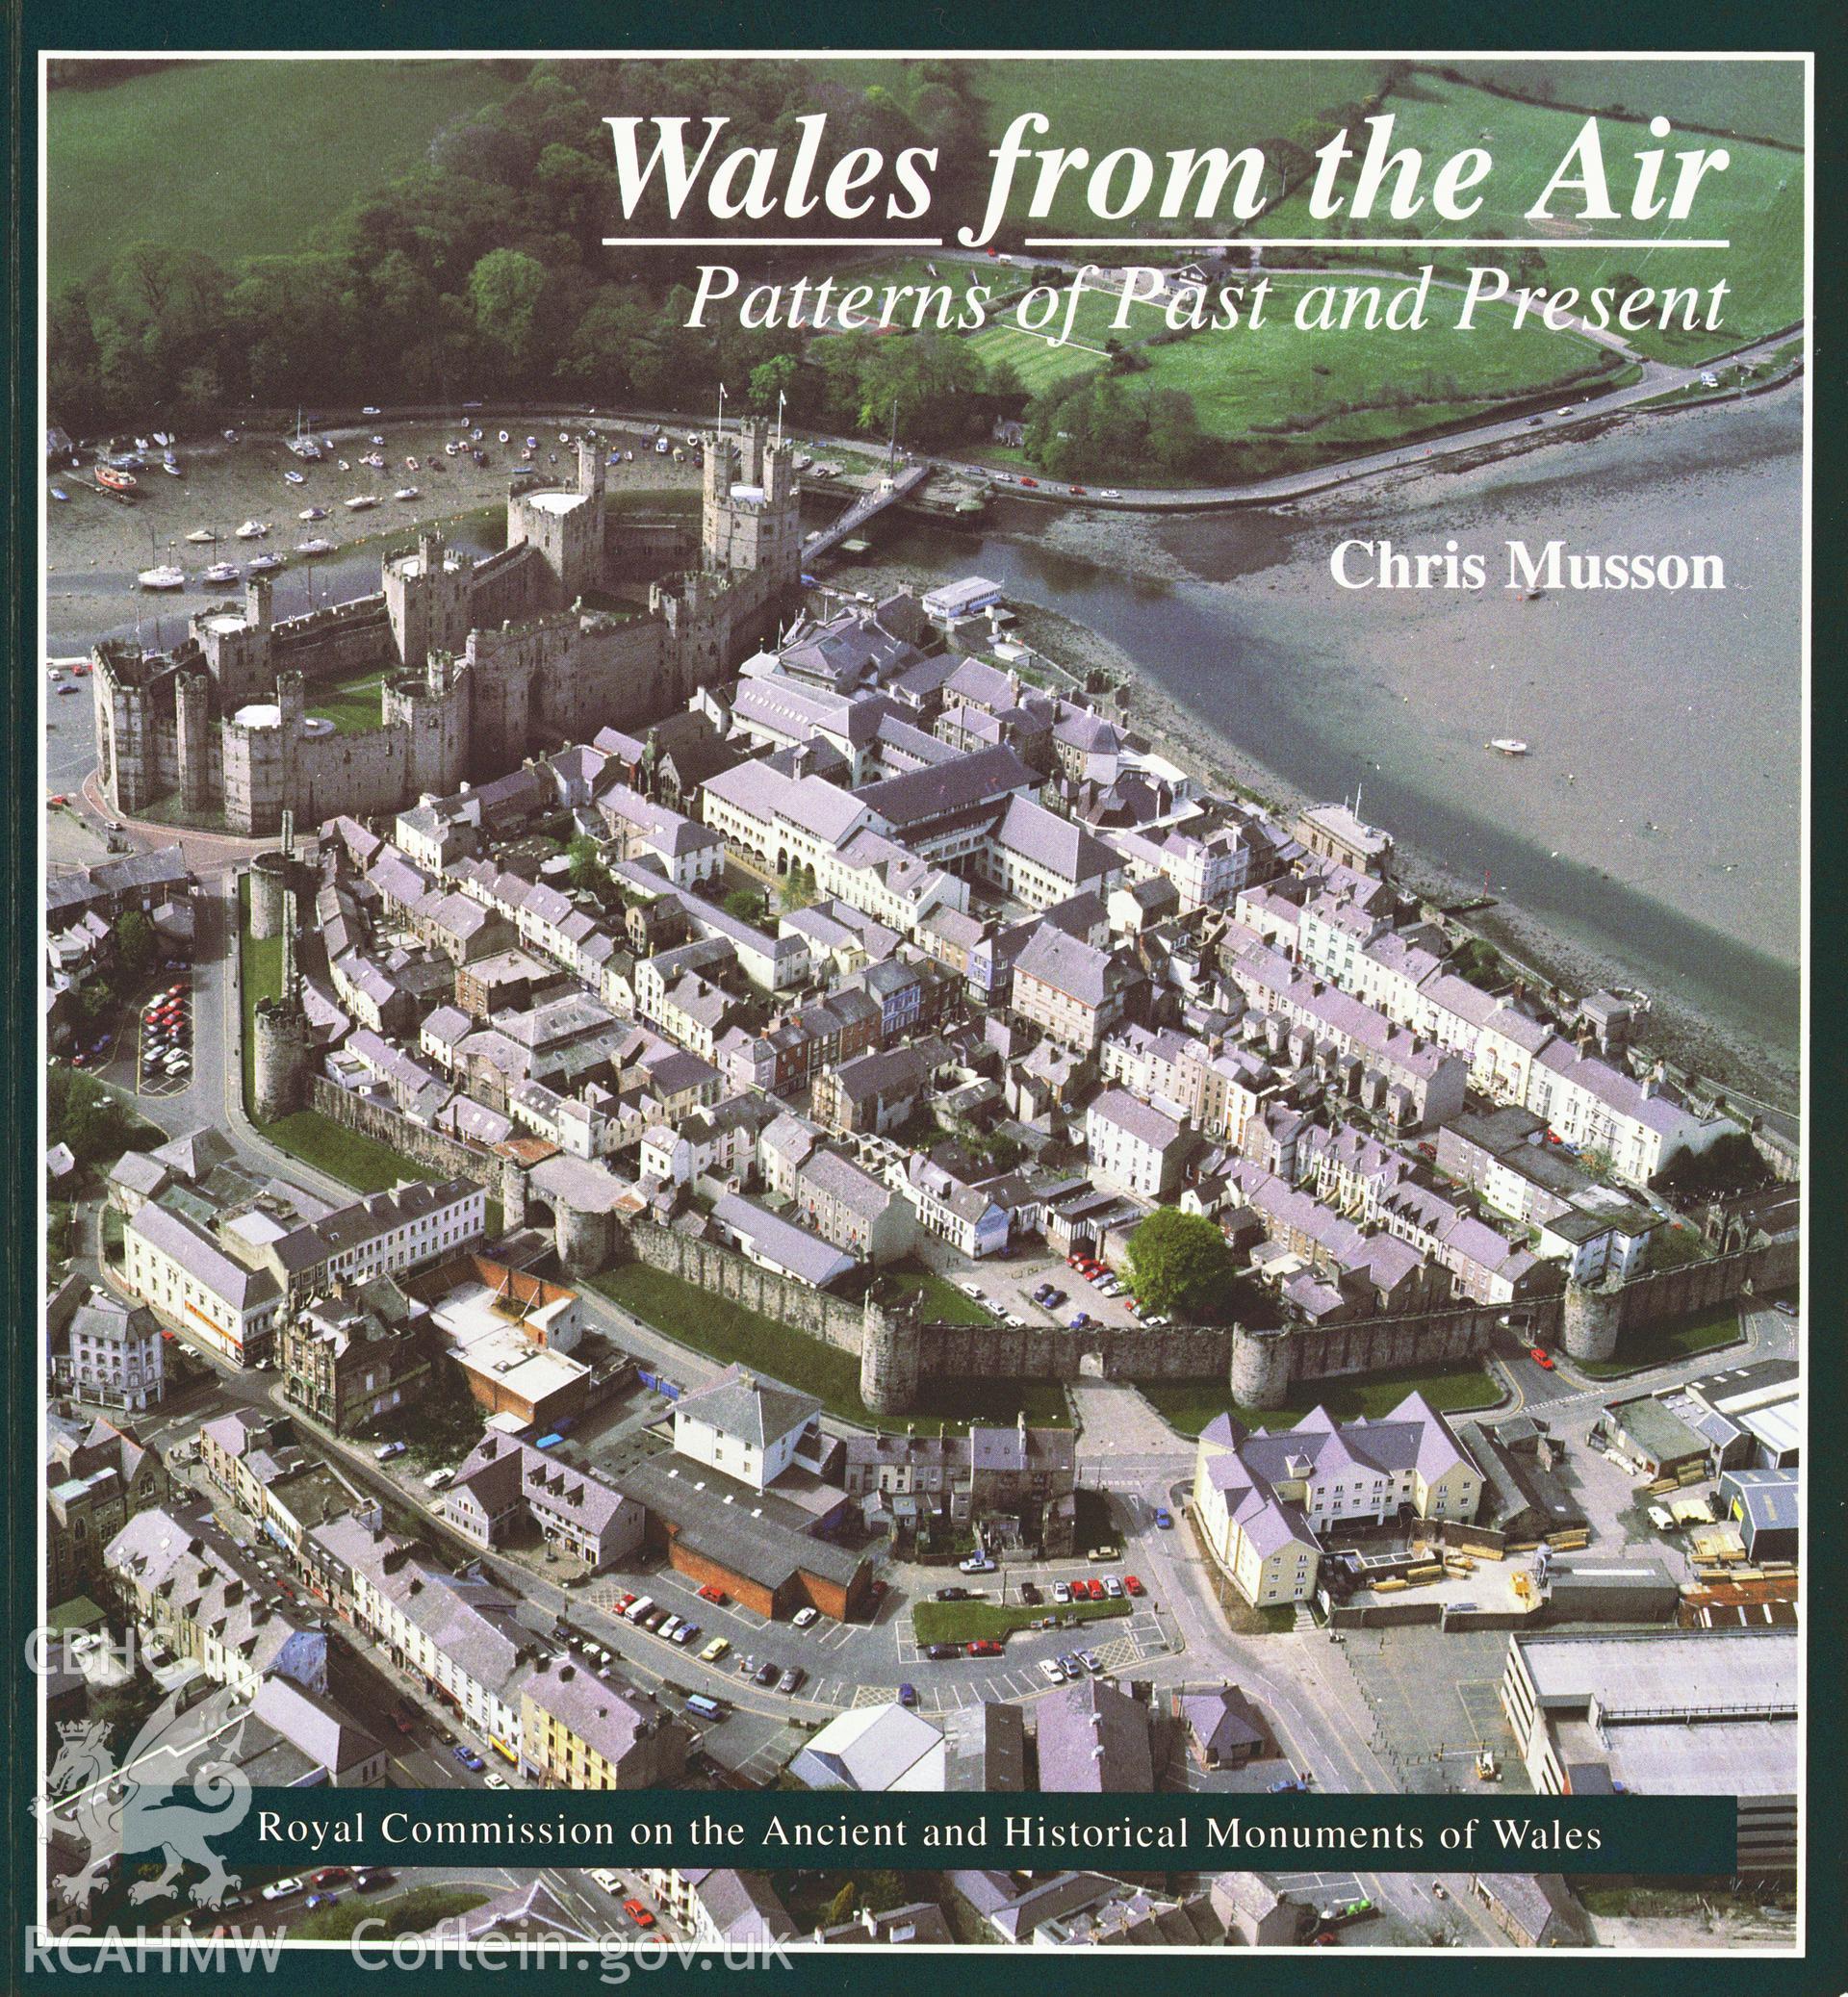 Colour transparency of the cover of the RCAHMW Publication of Wales from the Air, Patterns of Past and Present by Chris Musson.